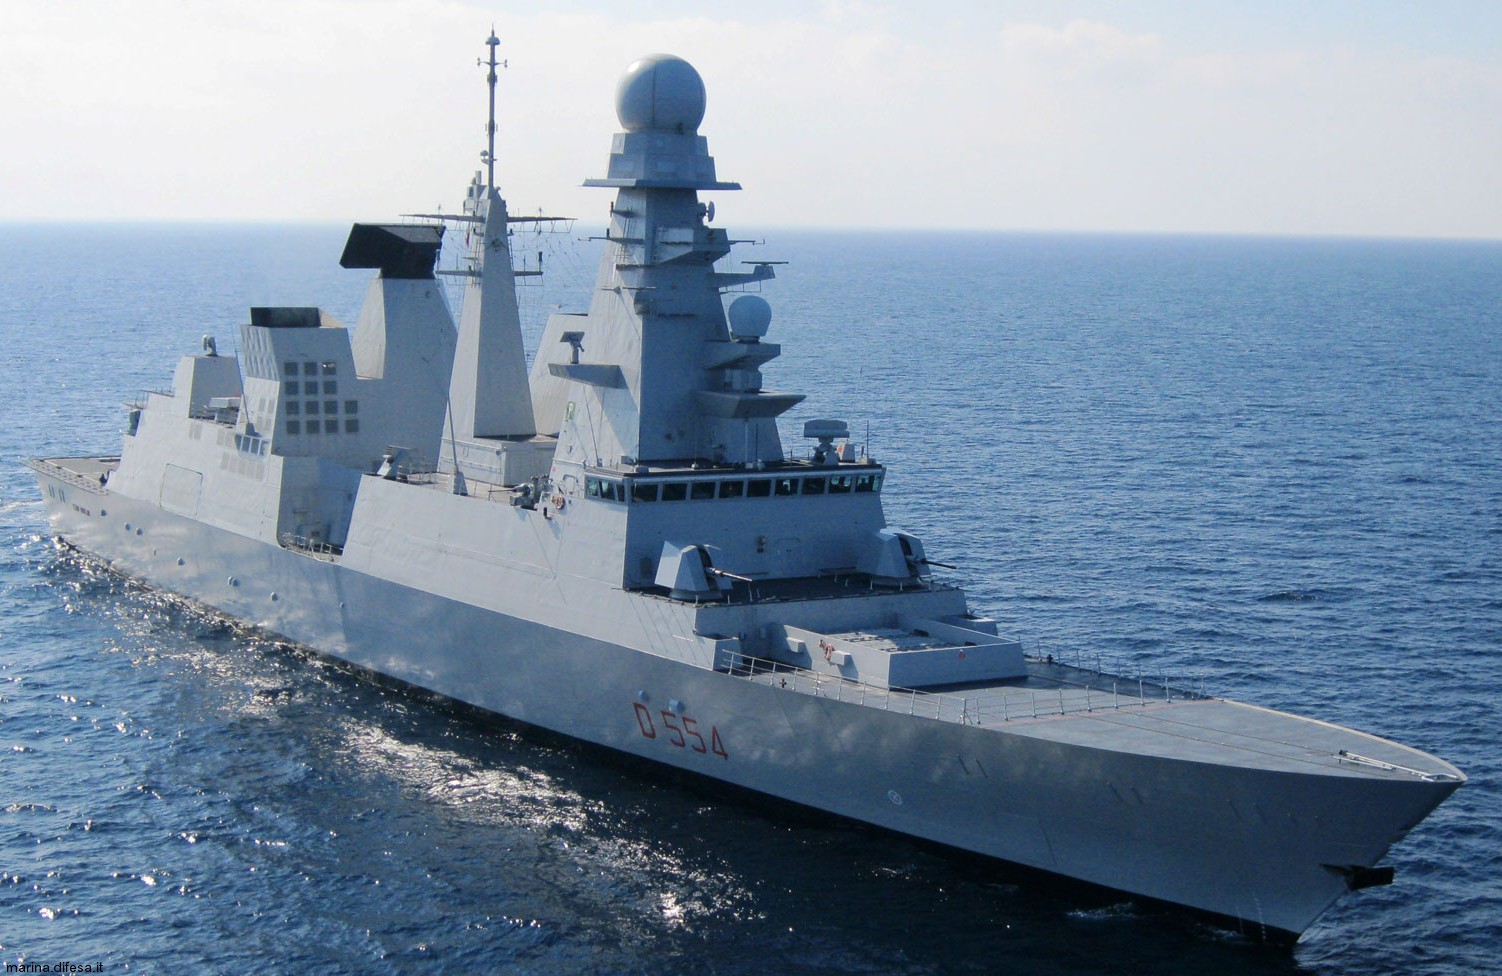 d-554 caio duilio its nave horizon class guided missile destroyer ddgh italian navy marina militare 39